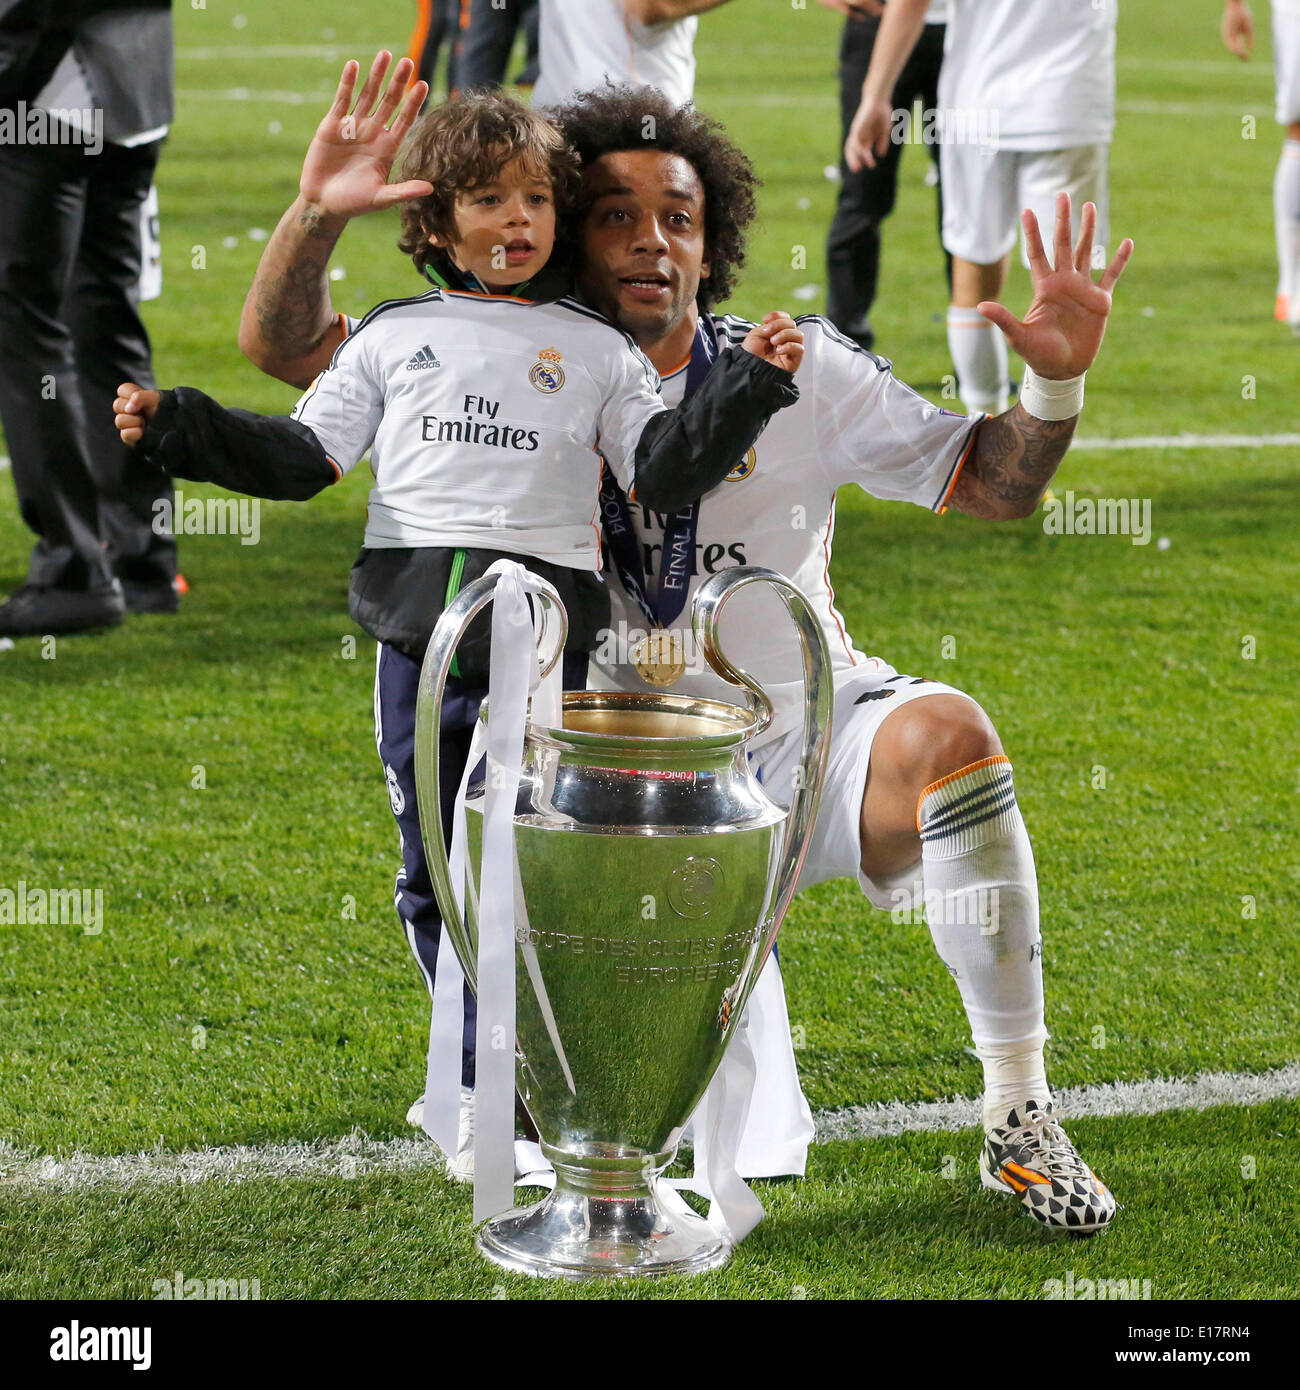 Marcelo (Real Madrid CF #12) showing the ten with his son and the trophy  after the final of the Champions league between Real Madrid and Atletico  Madrid, Estadio da Luz in Lisbon